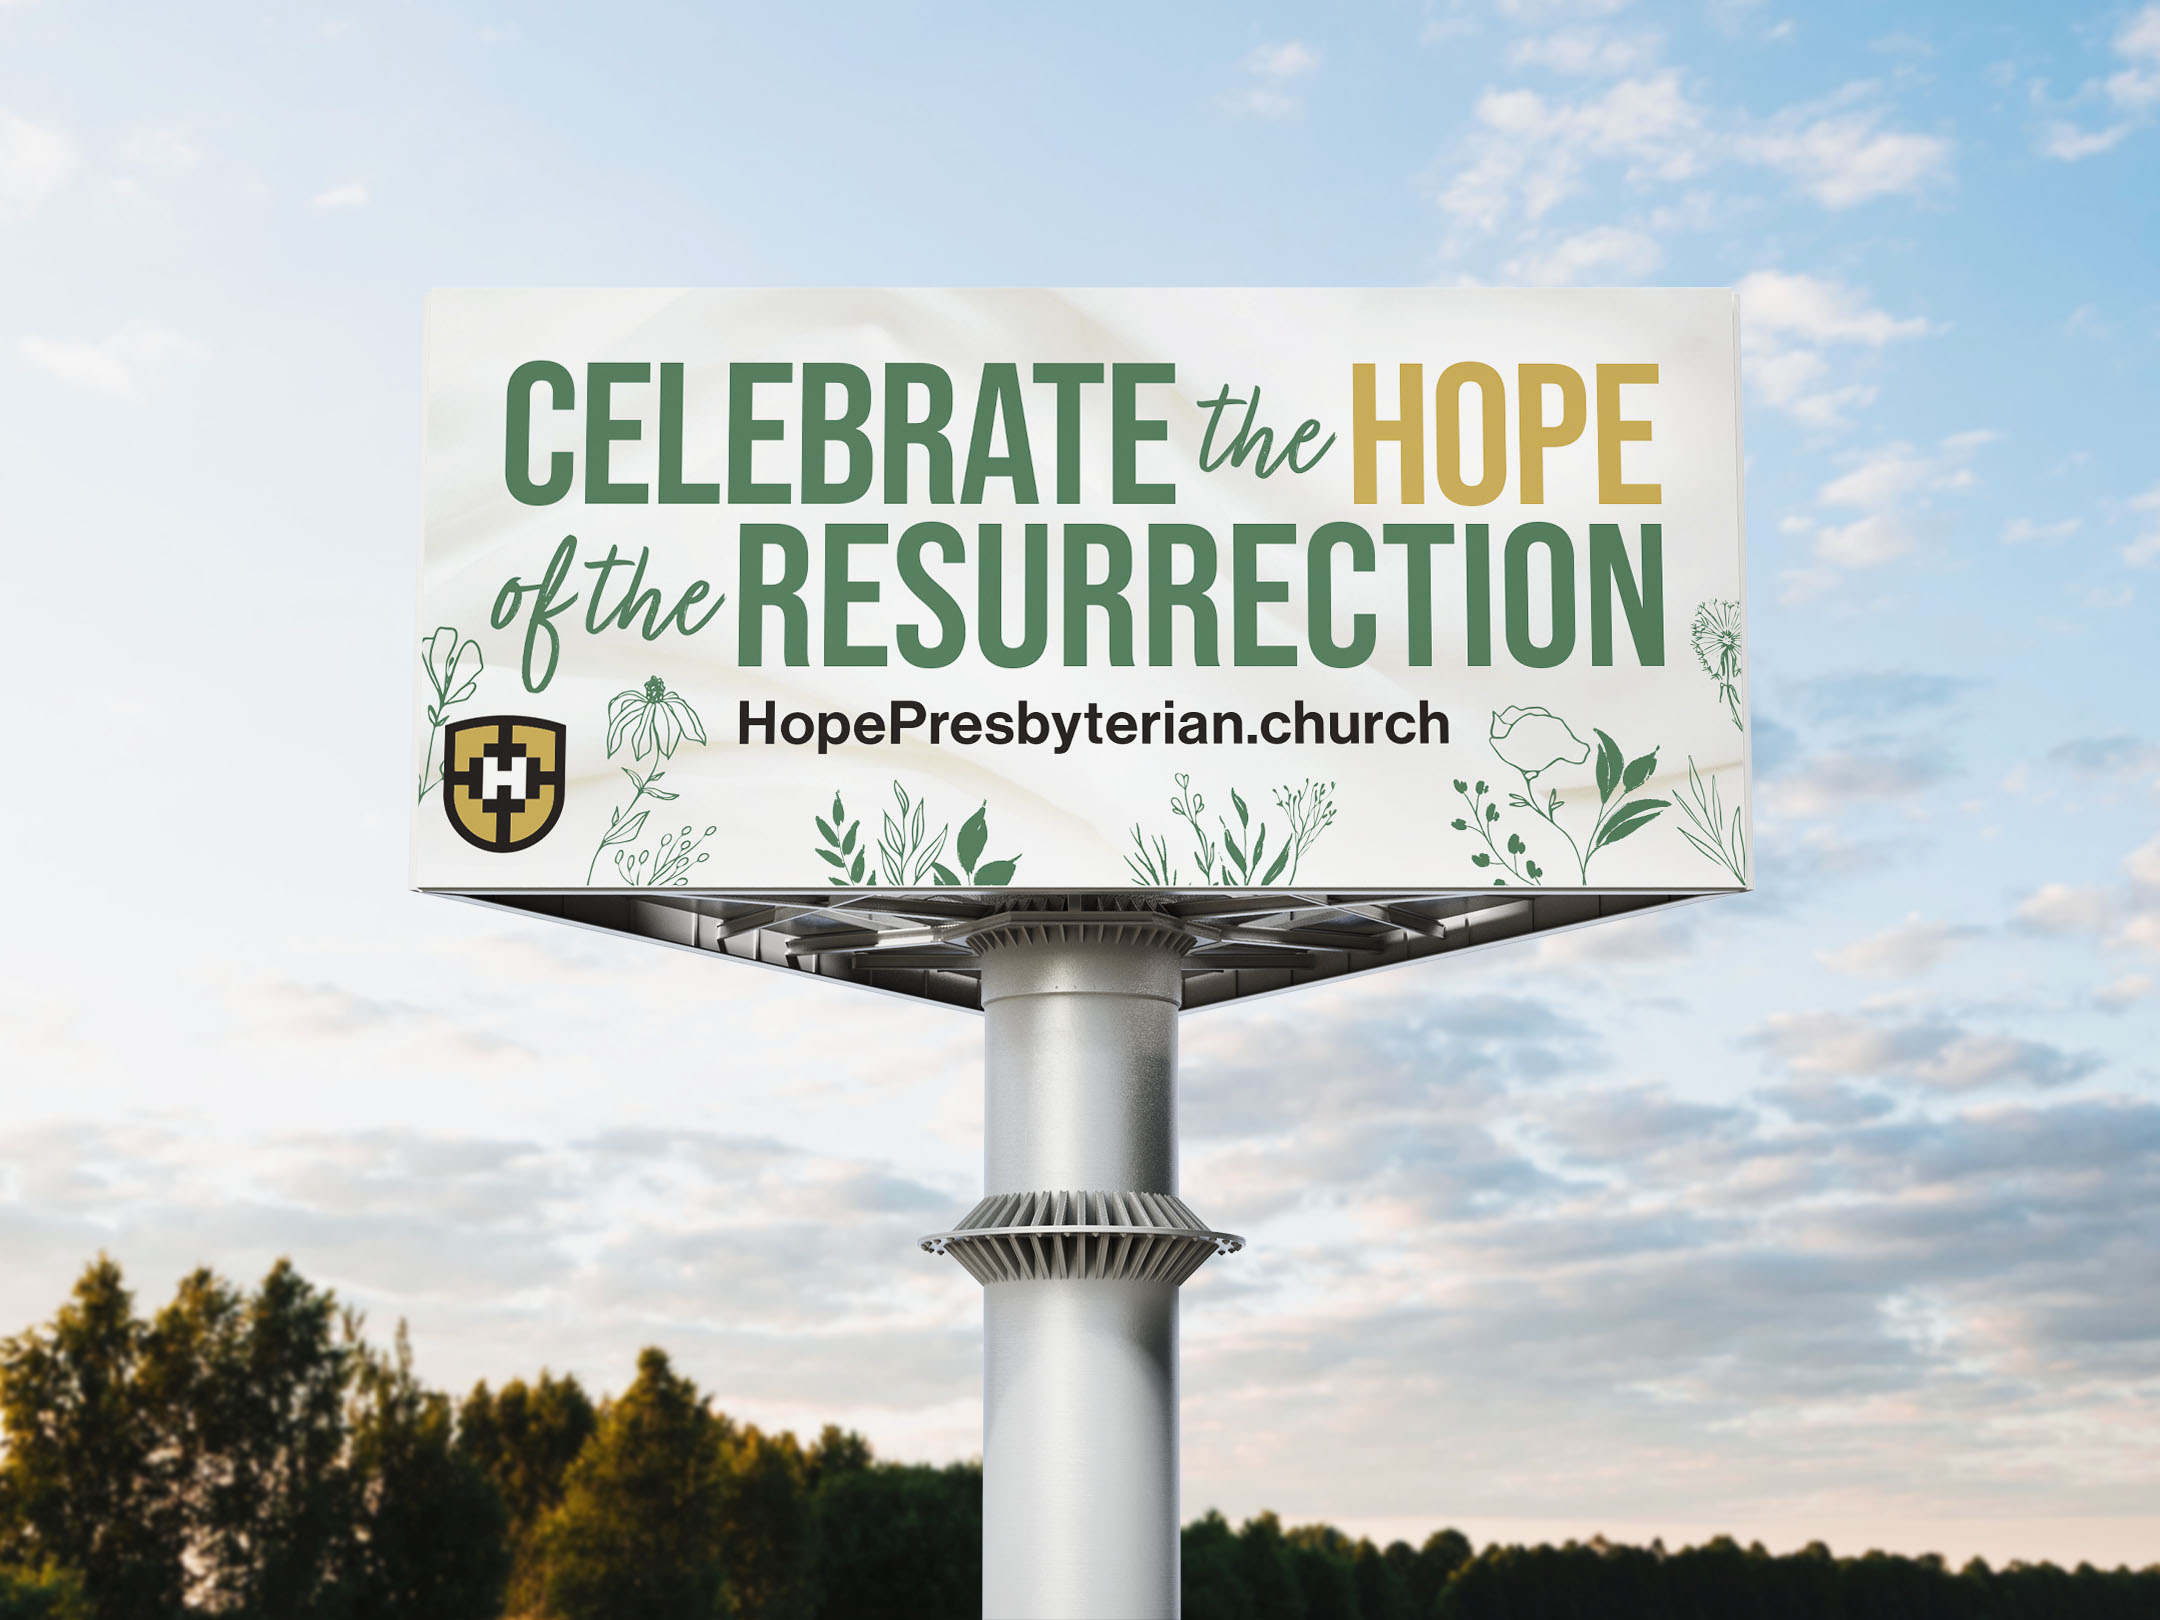 A floral billboard inviting passers-by to come celebrate the hope of the resurrection.